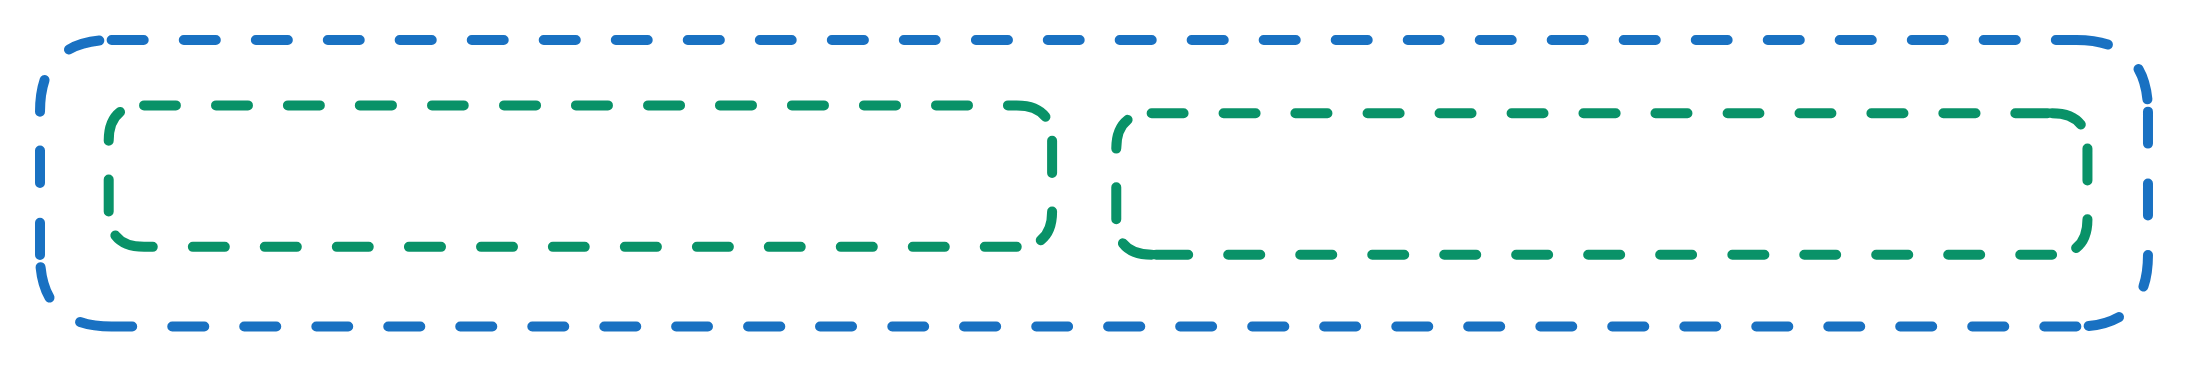 Image showing stretch justify horizontal